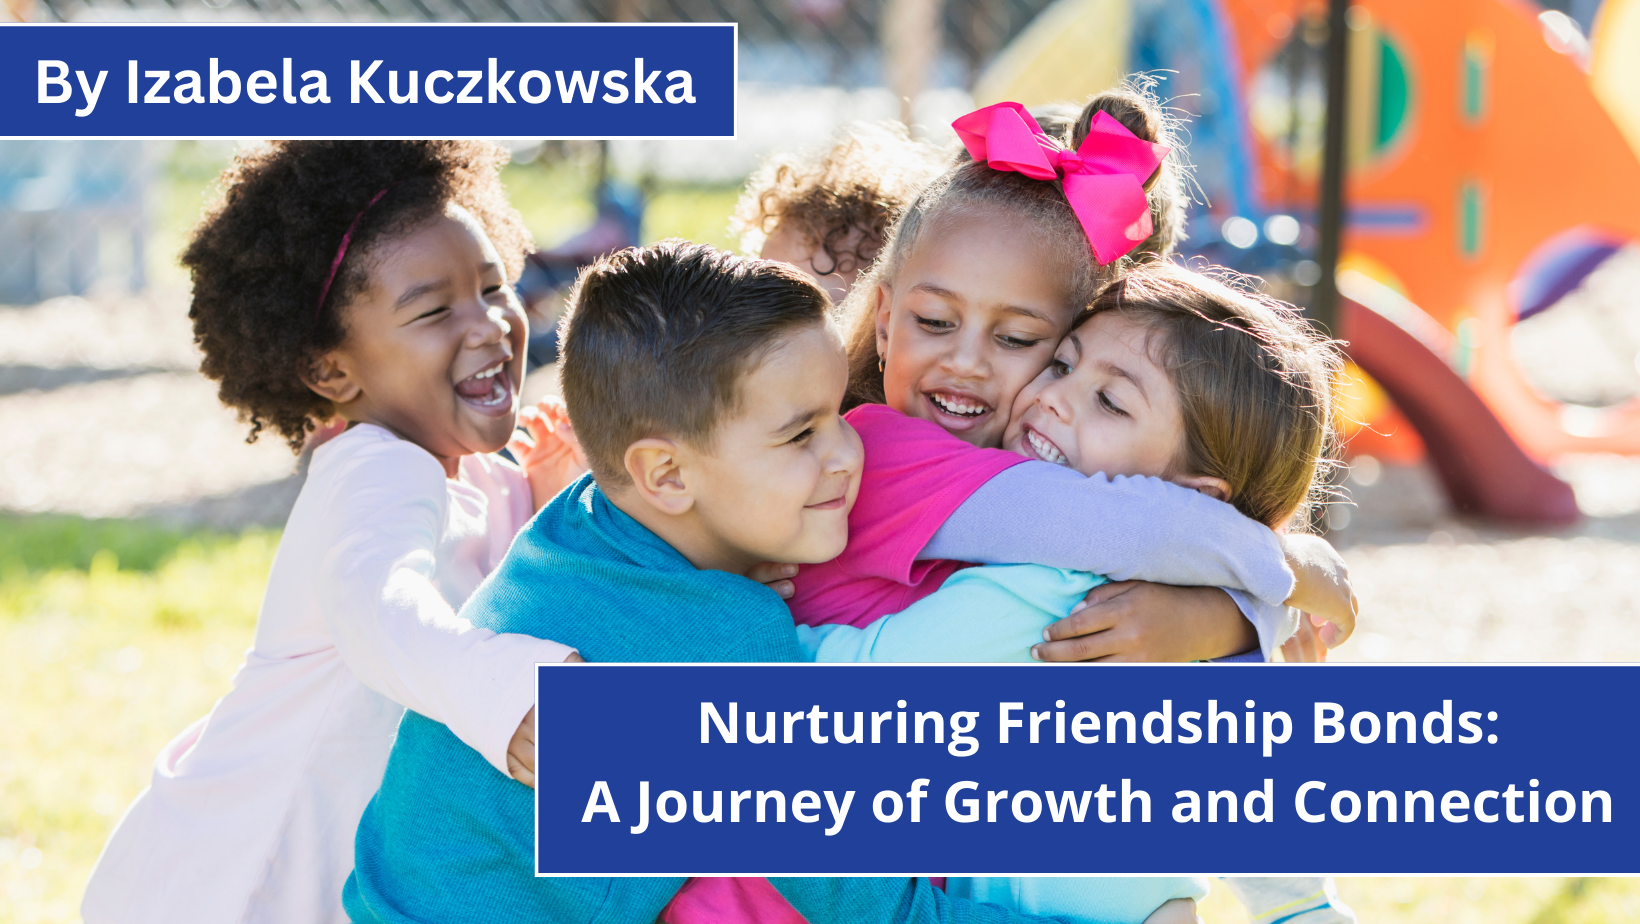 Nurturing Friendship Bonds: A Journey of Growth and Connection